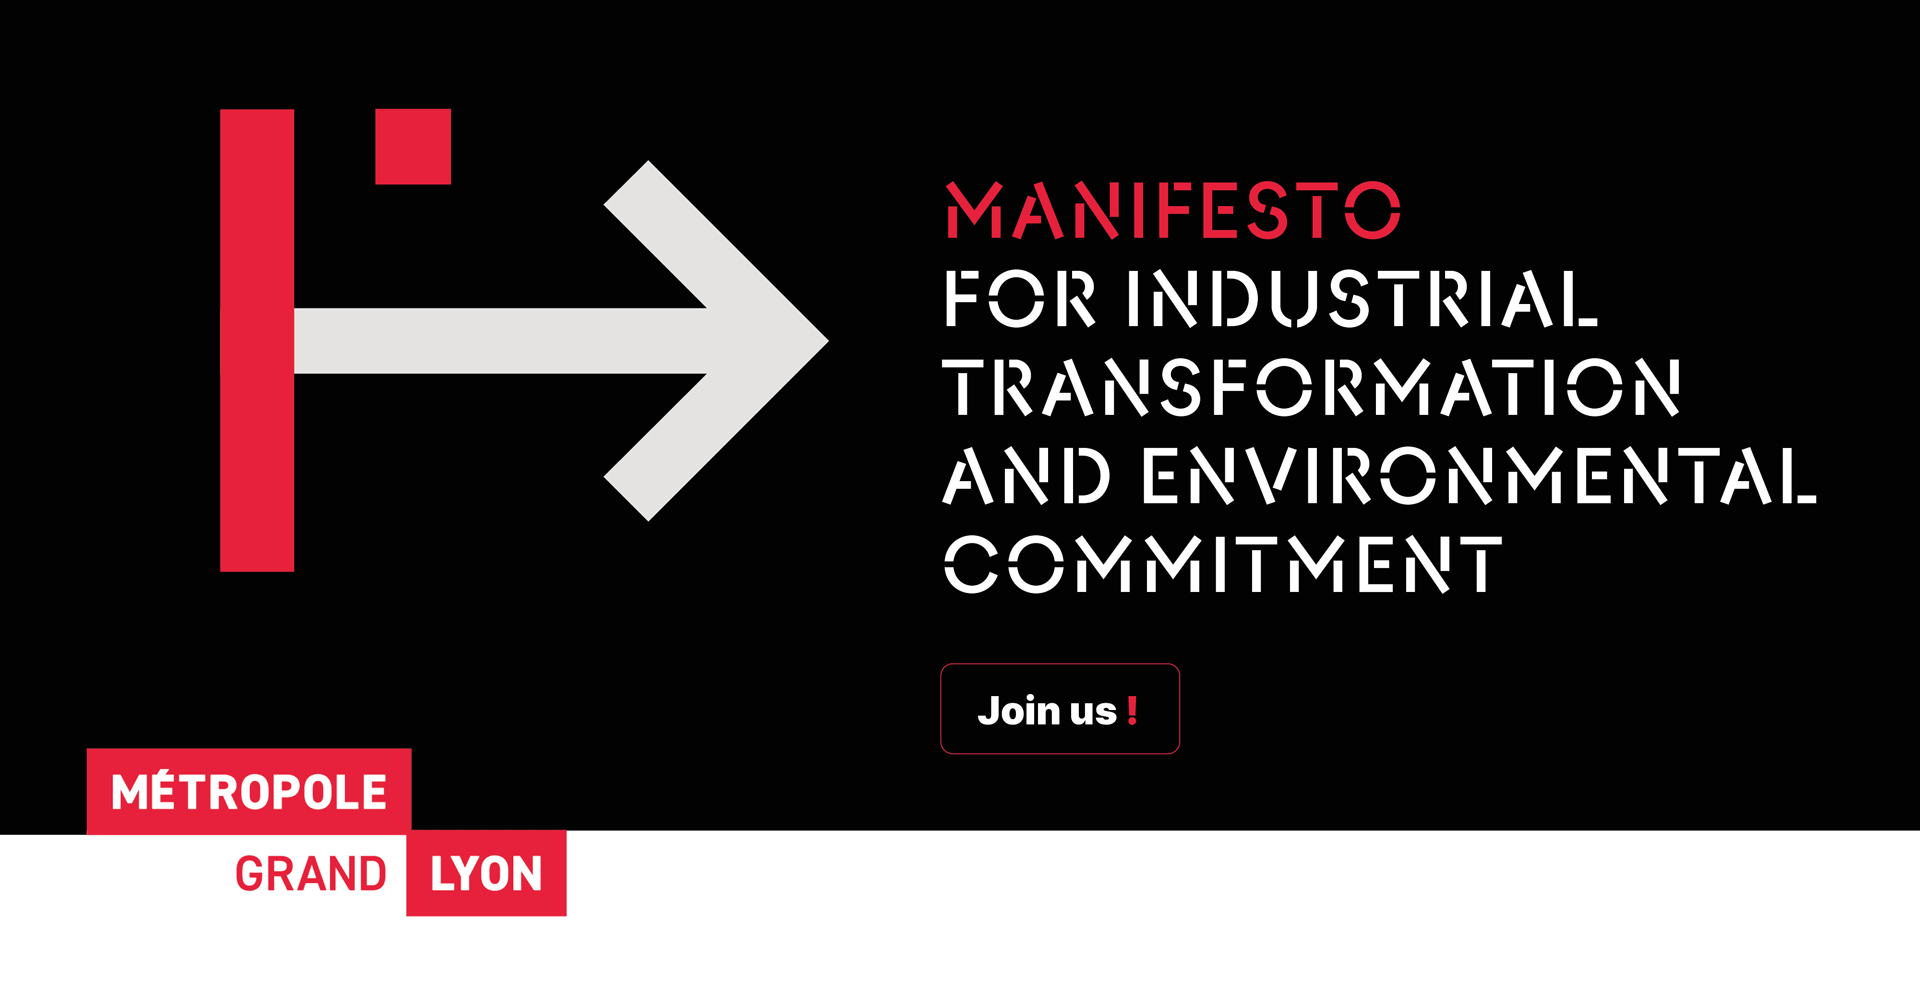 Manifesto for industrial transformation and environmental commitment in the Lyon metropolitan area: “join us”